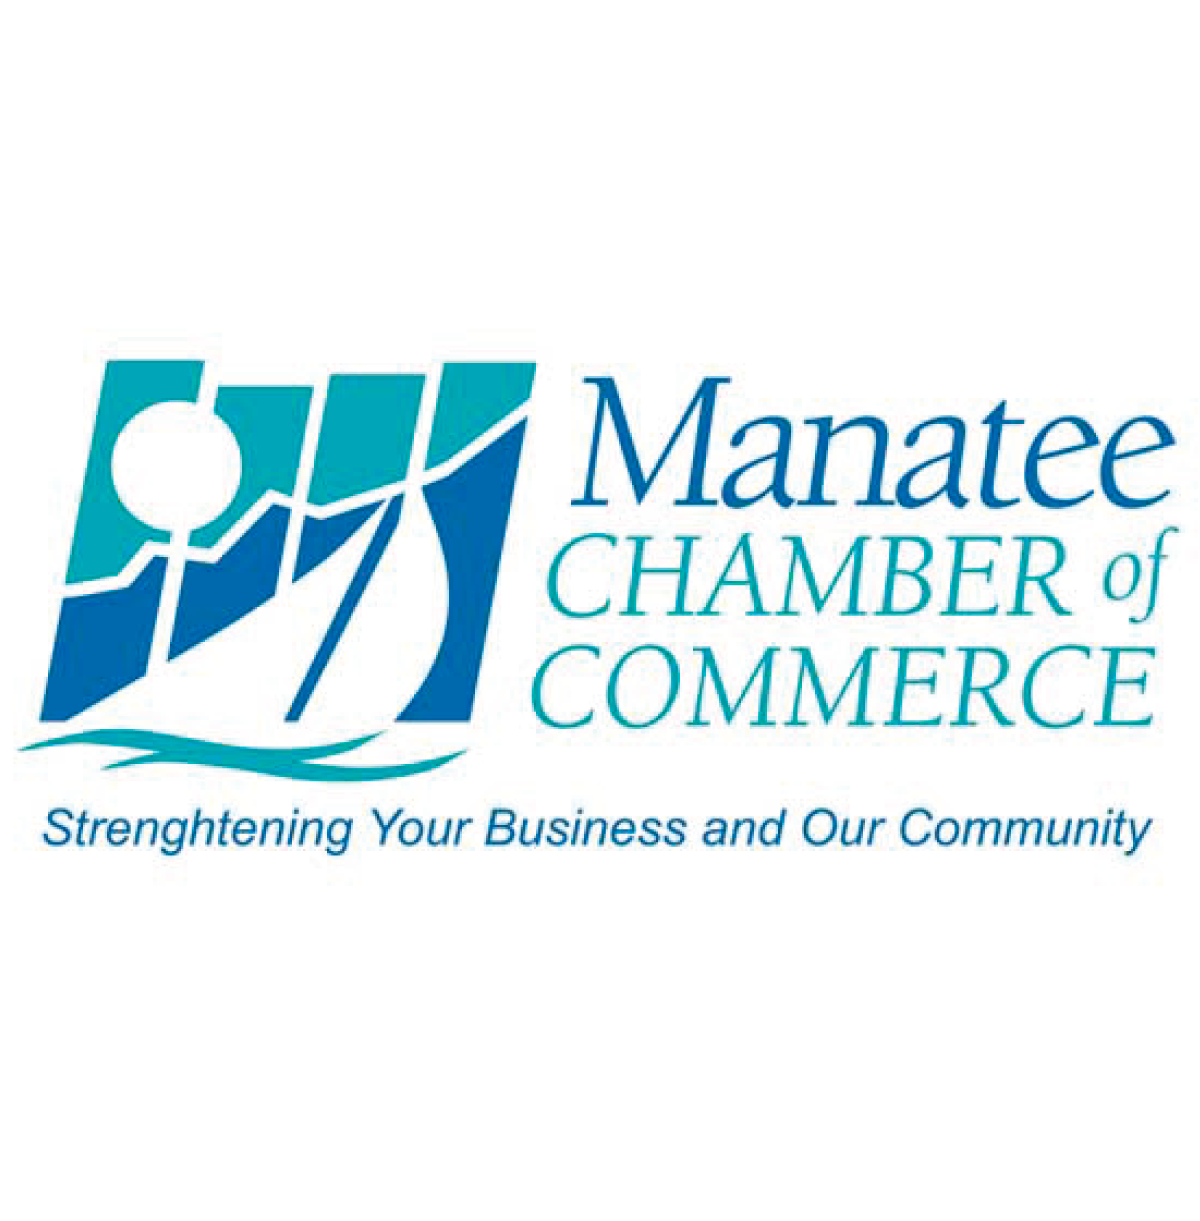 manatee-chamber-of-commerce.png